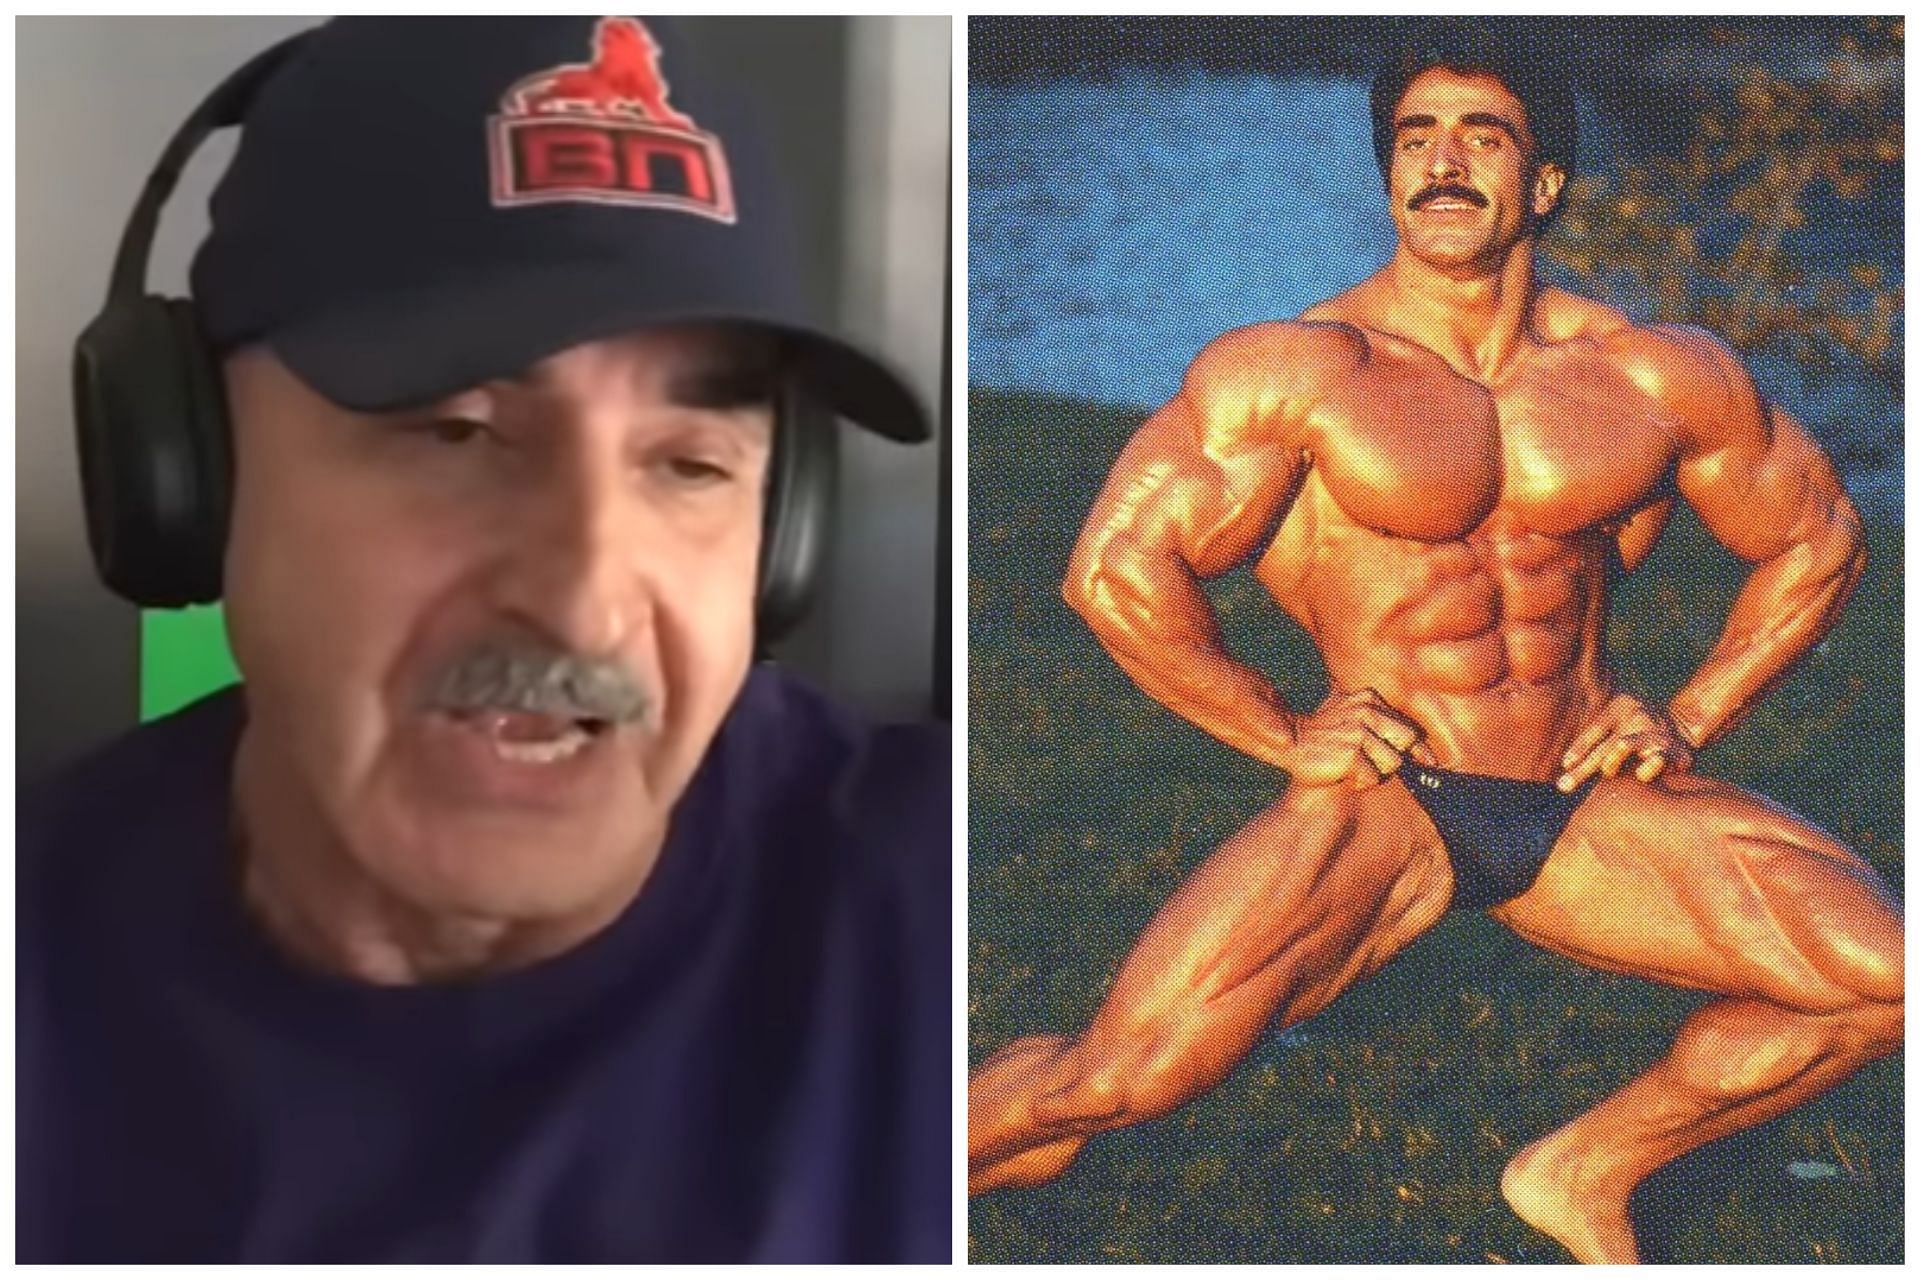 Samir Bannout on judging at major shows: Image via YouTube (@ Old School Labs) and Instagram (@officialsamirbannout)